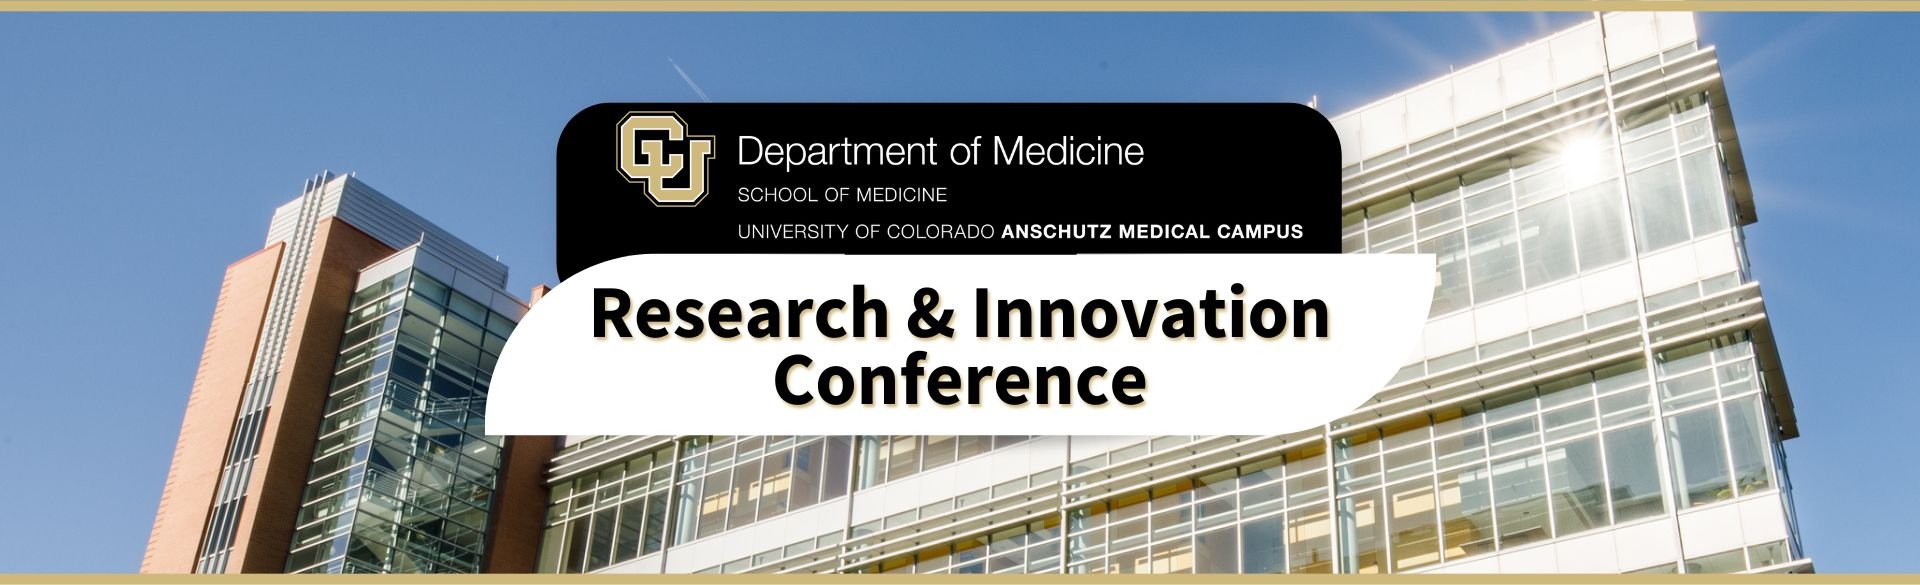 Department of Medicine Research & Innovation Conference